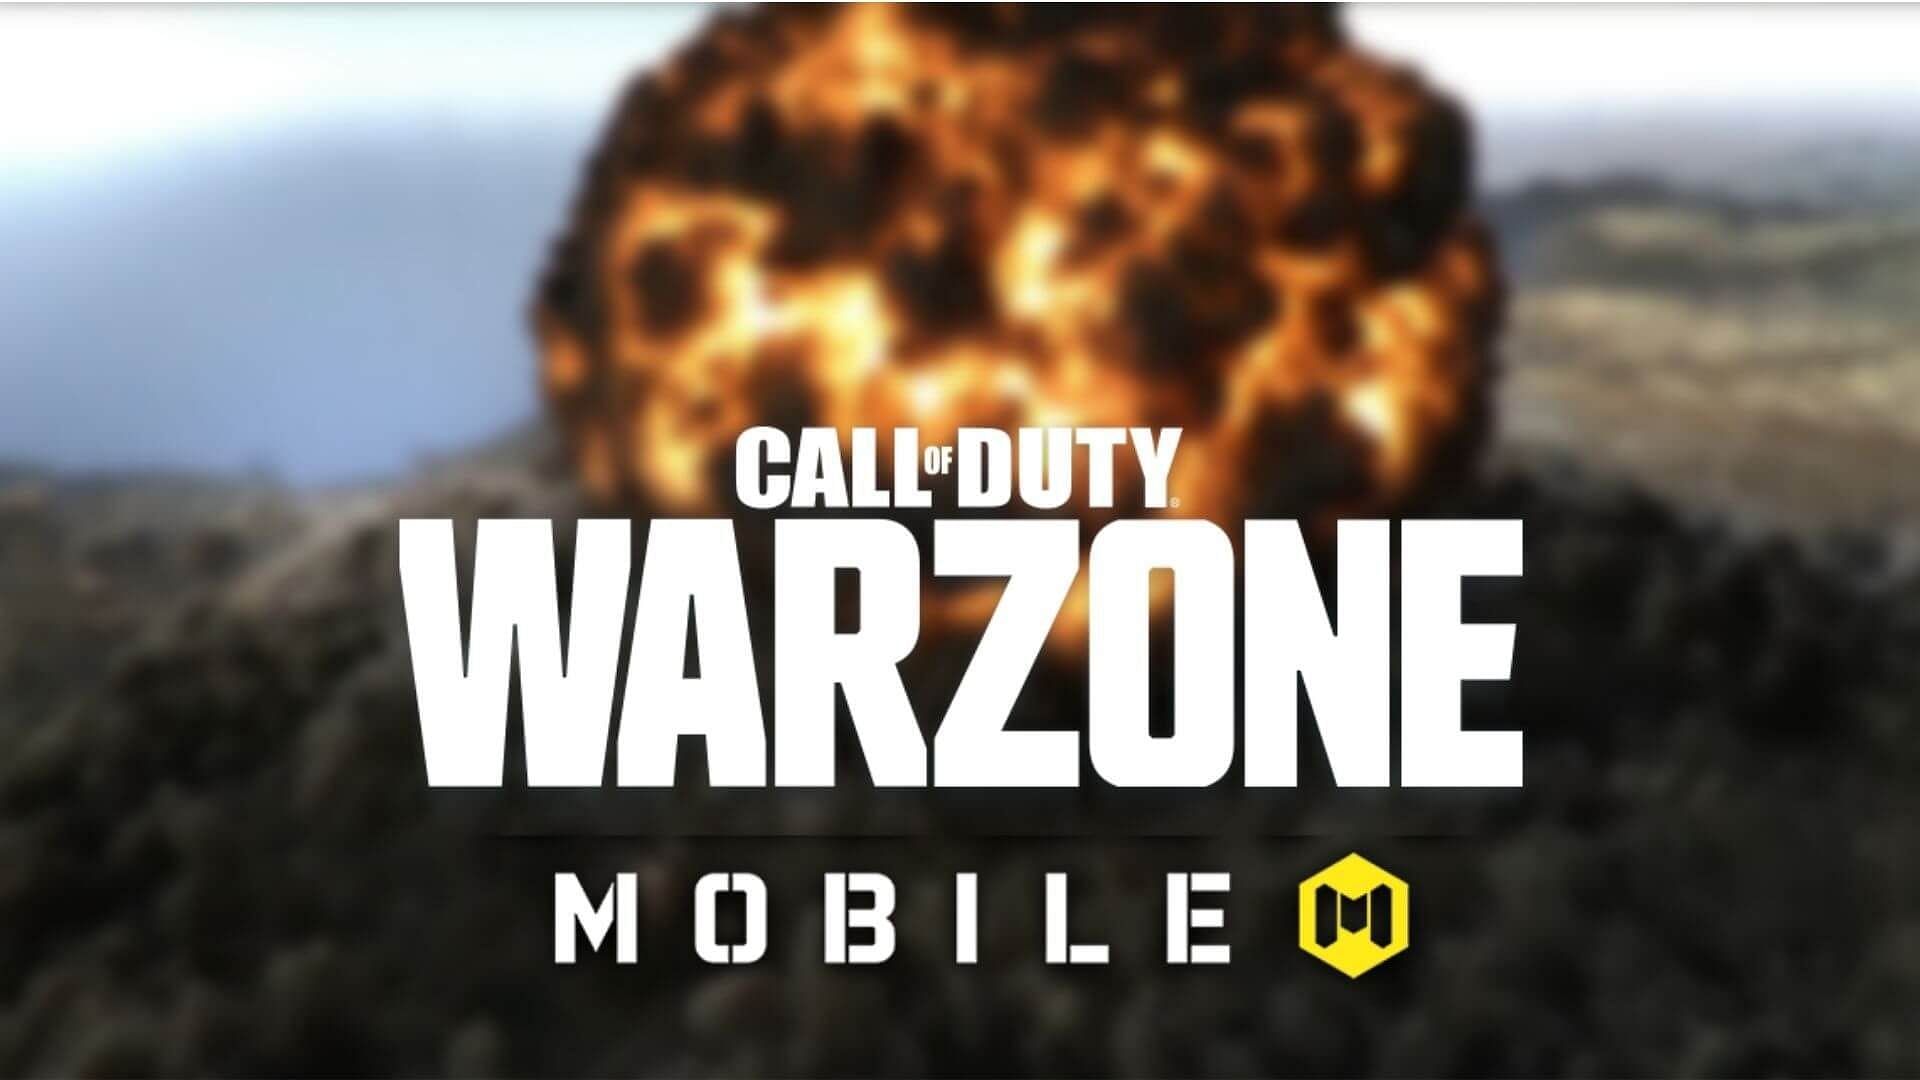 COD Warzone can easily be a reality now (Image via Charlie intel)